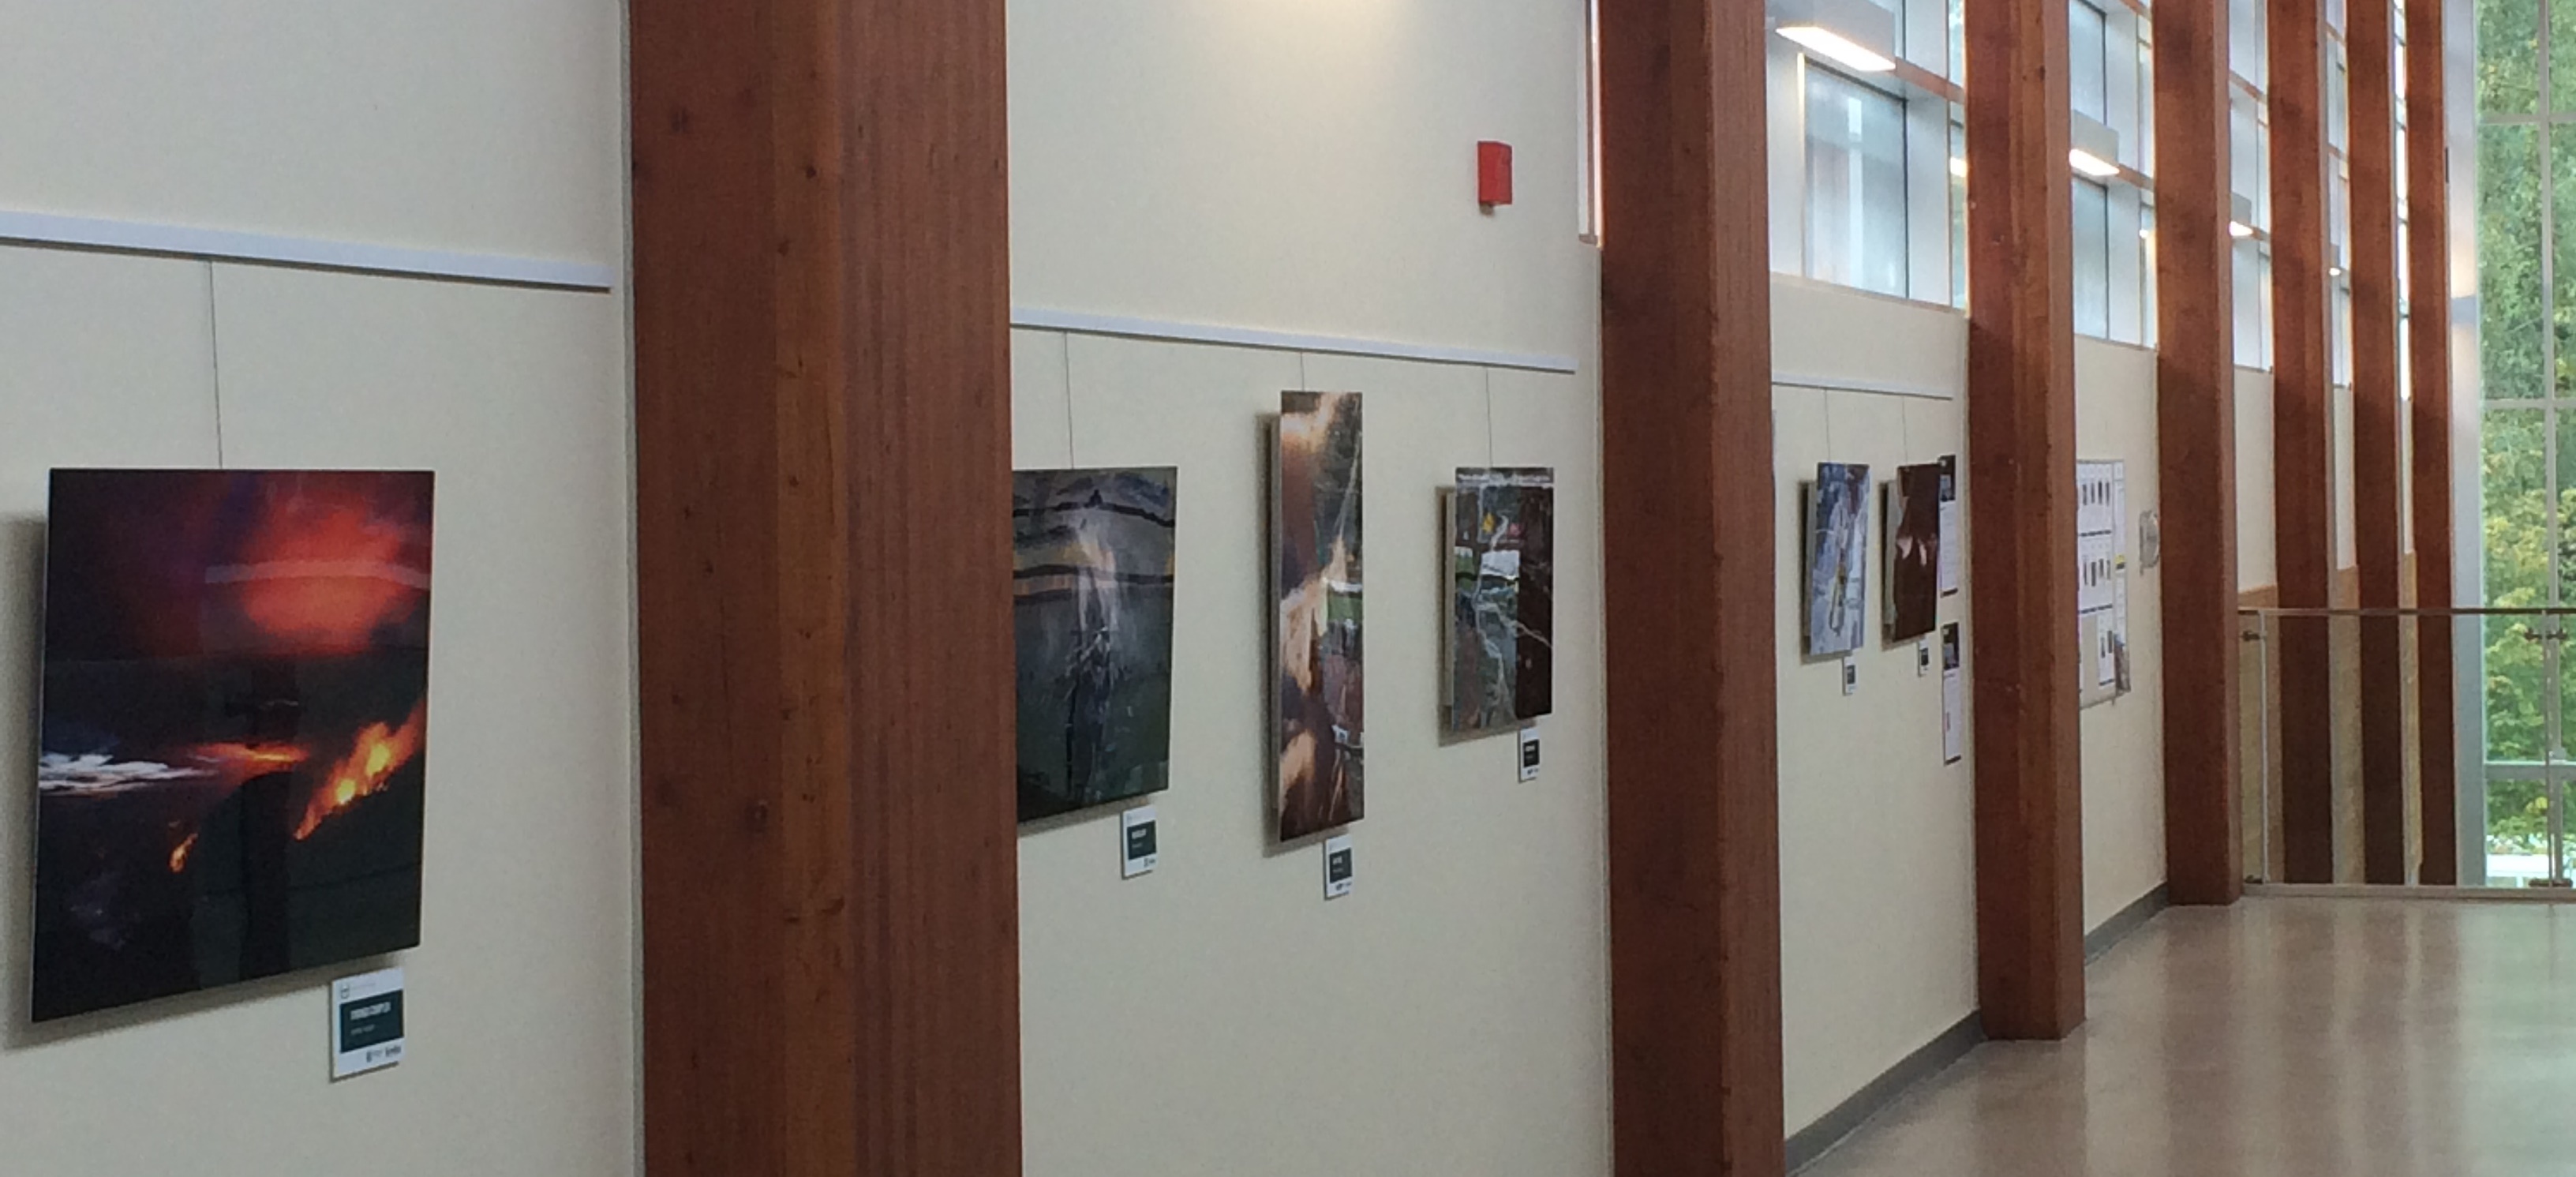 Gallery display at Delbrook Community Recreation Centre